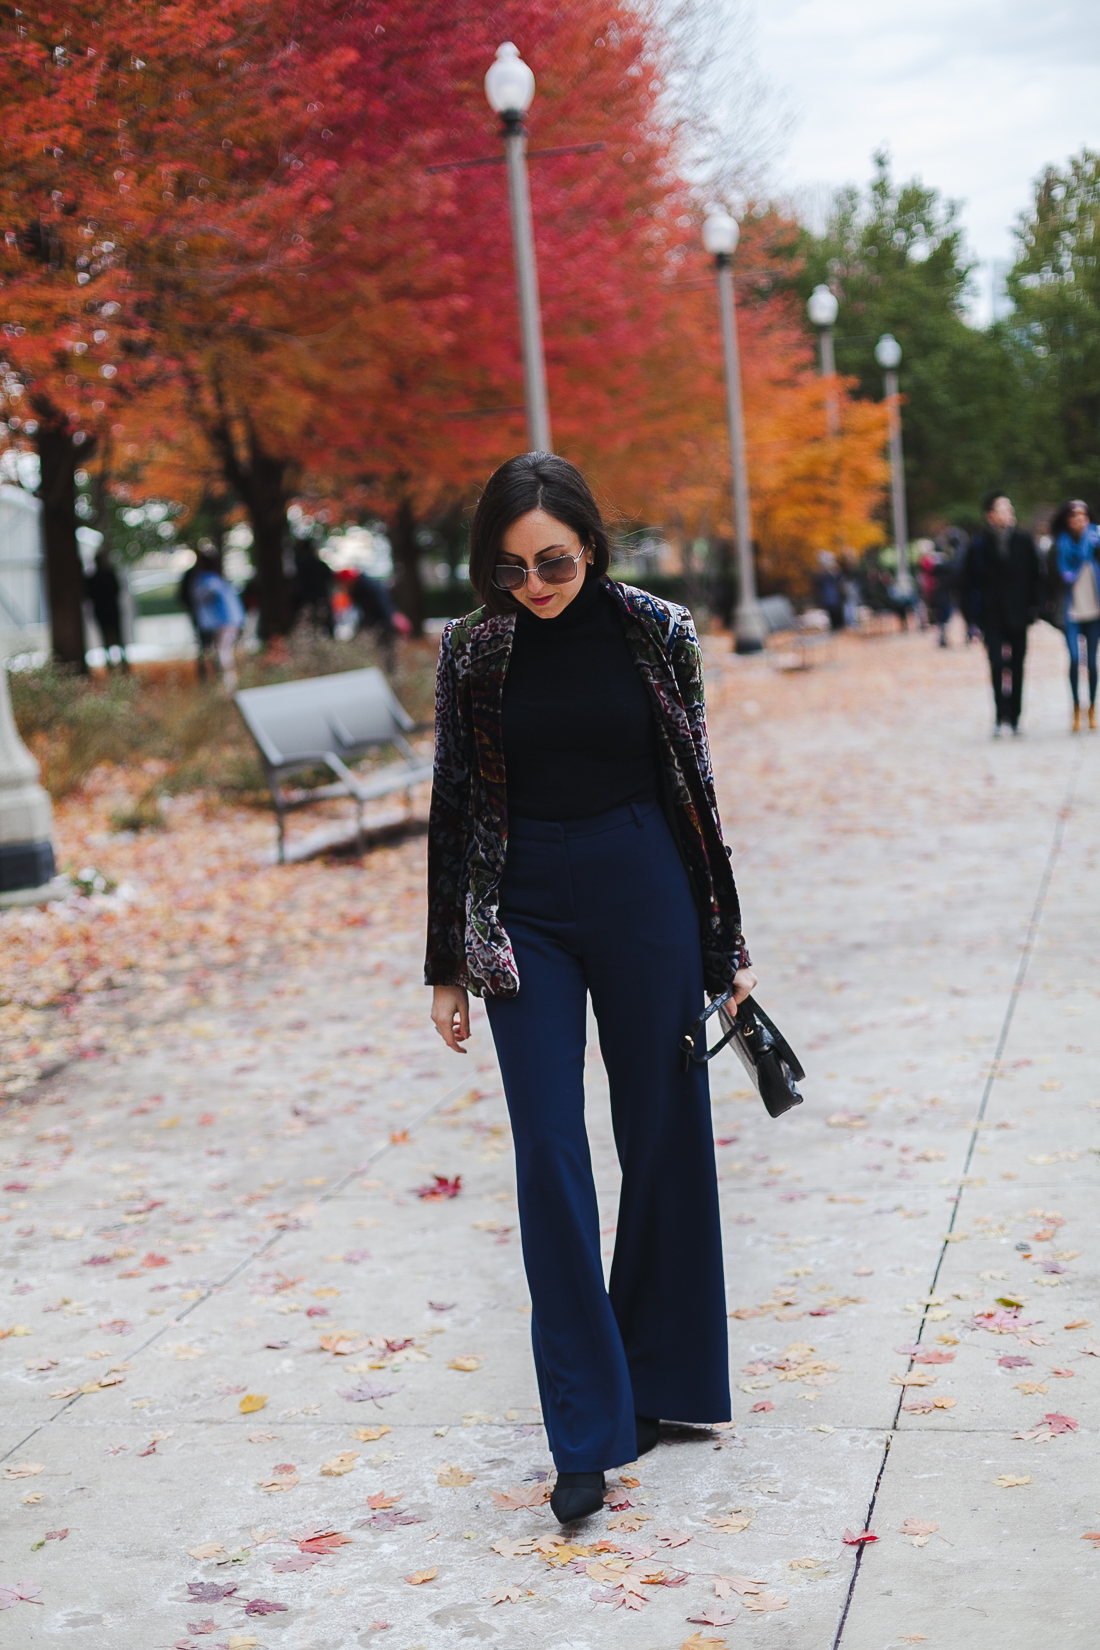 Yana Frigelis of NoMad Luxuries wearinga velvet paisley blazer, high-waisted navy pants for Thanksgiving with a 70's vibe in Chicago